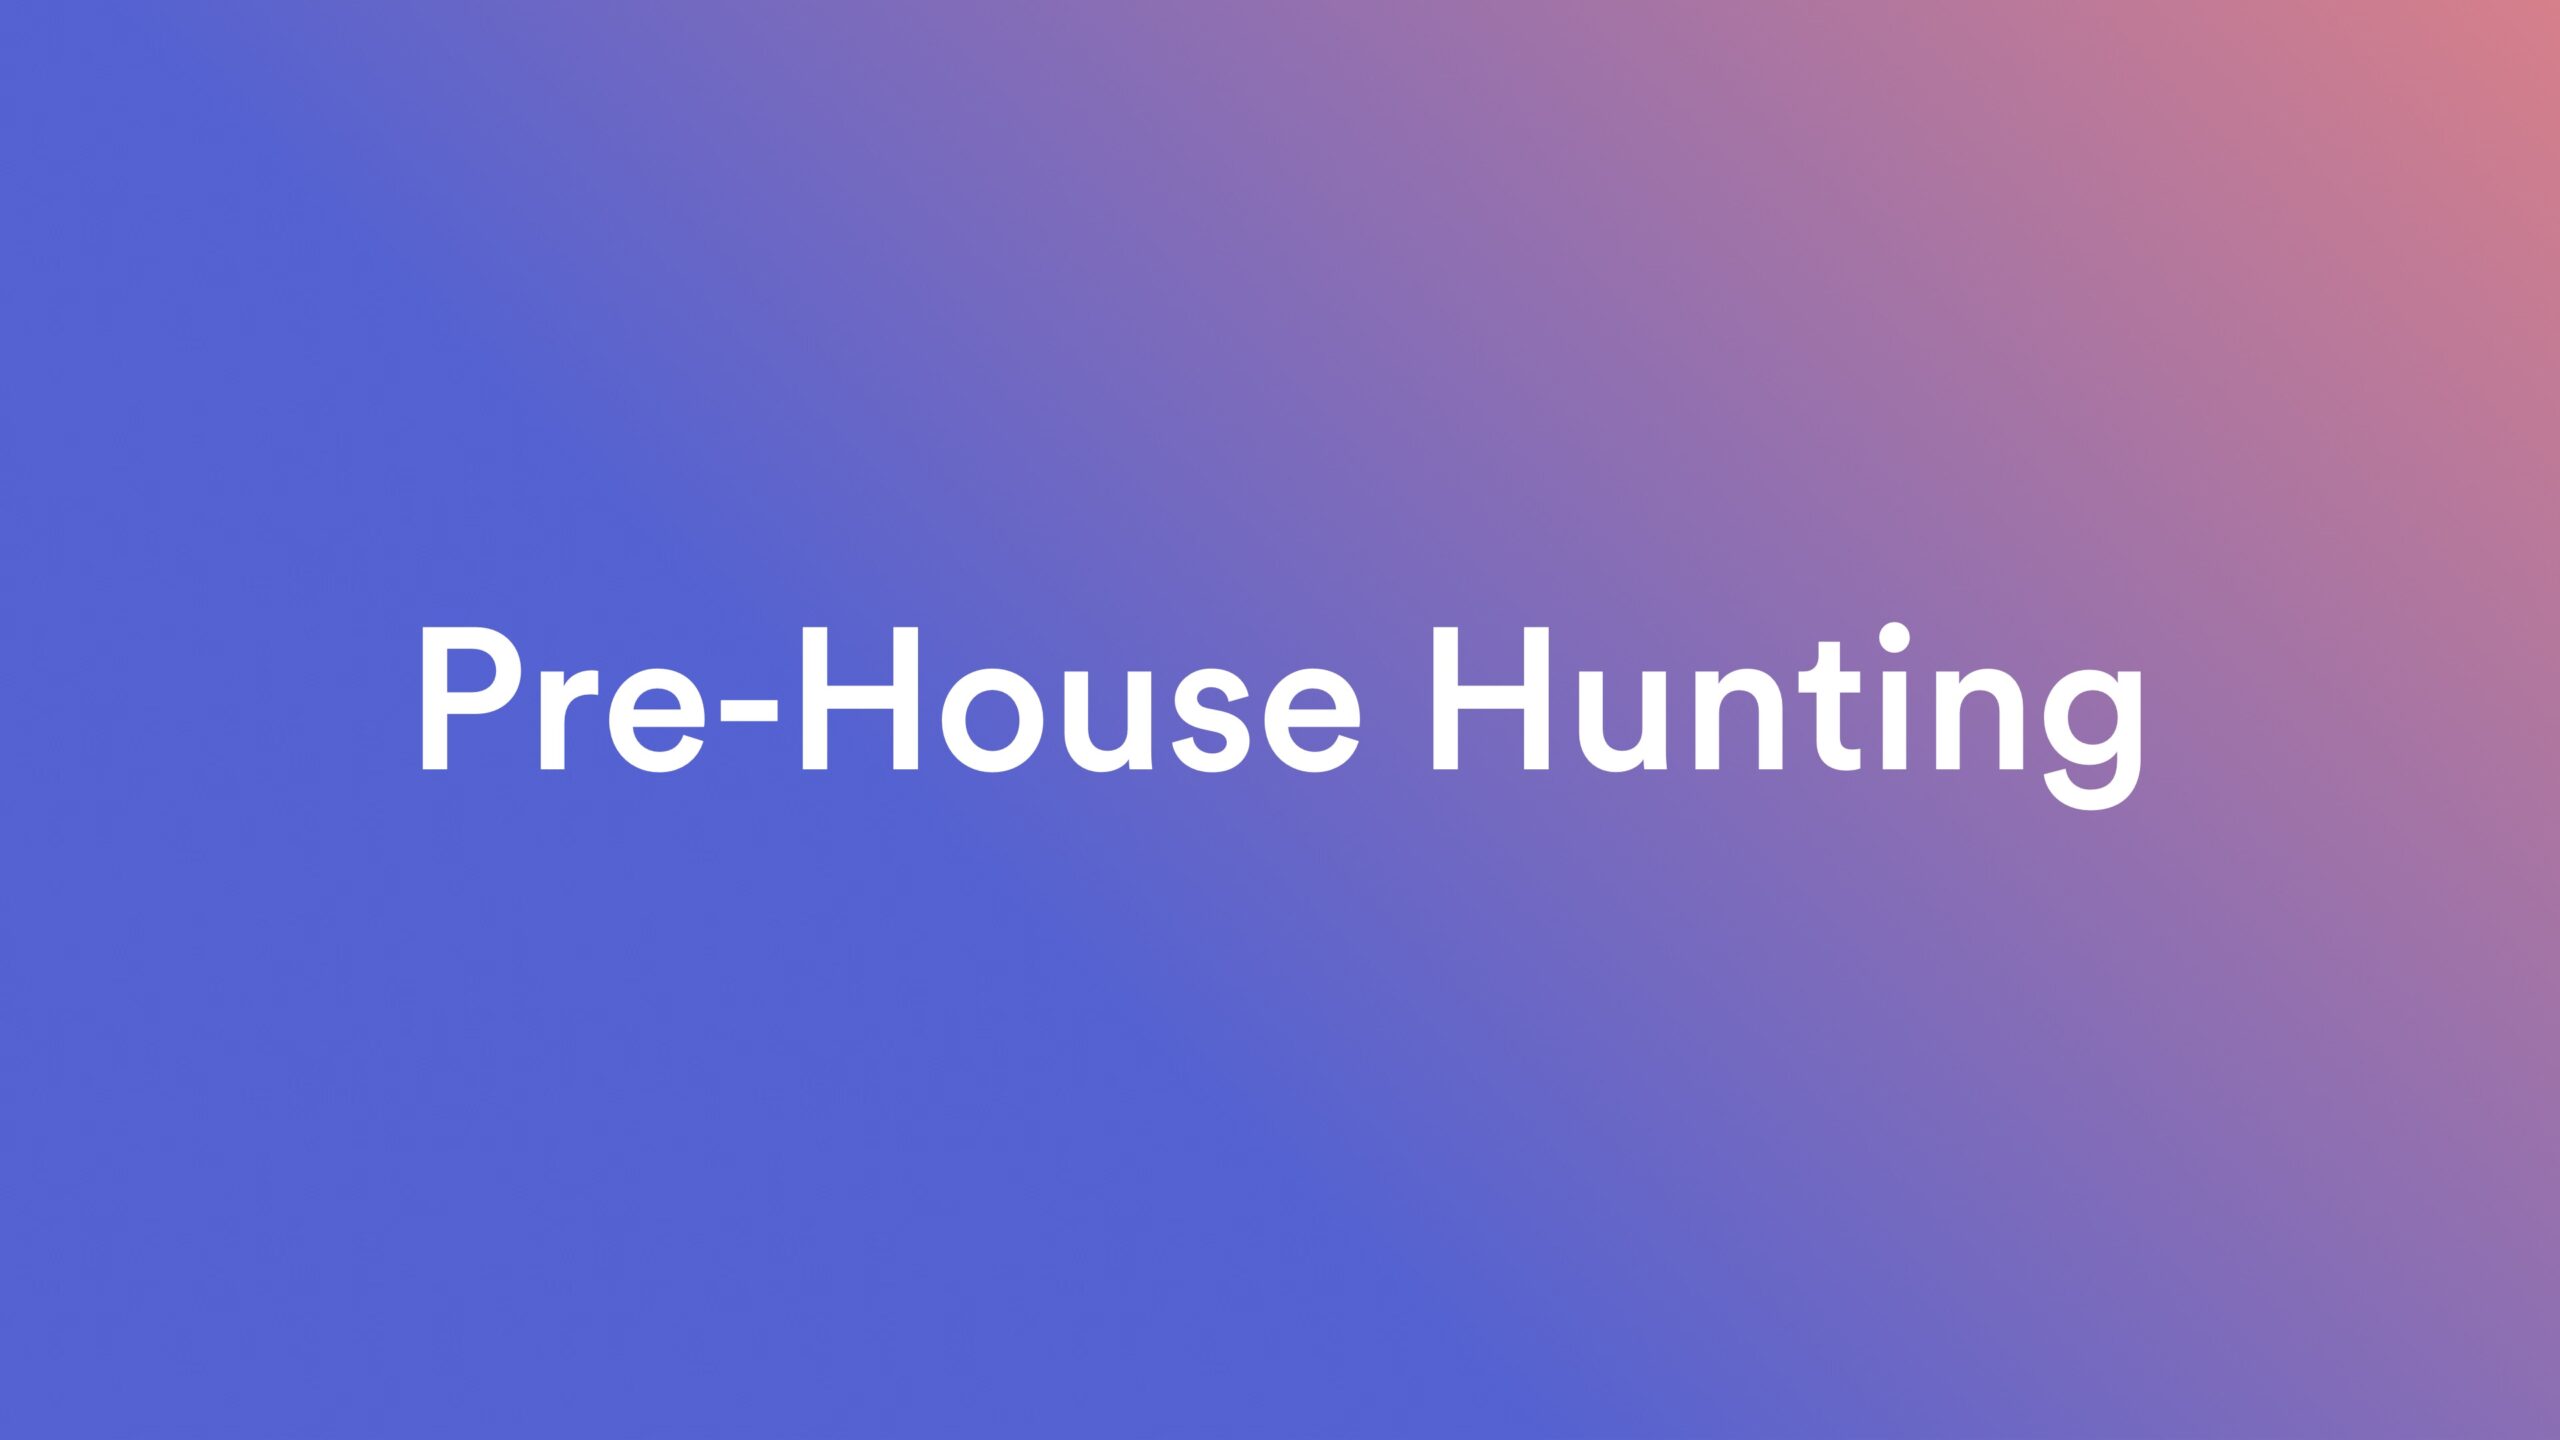 Graphic: Pre-house hunting